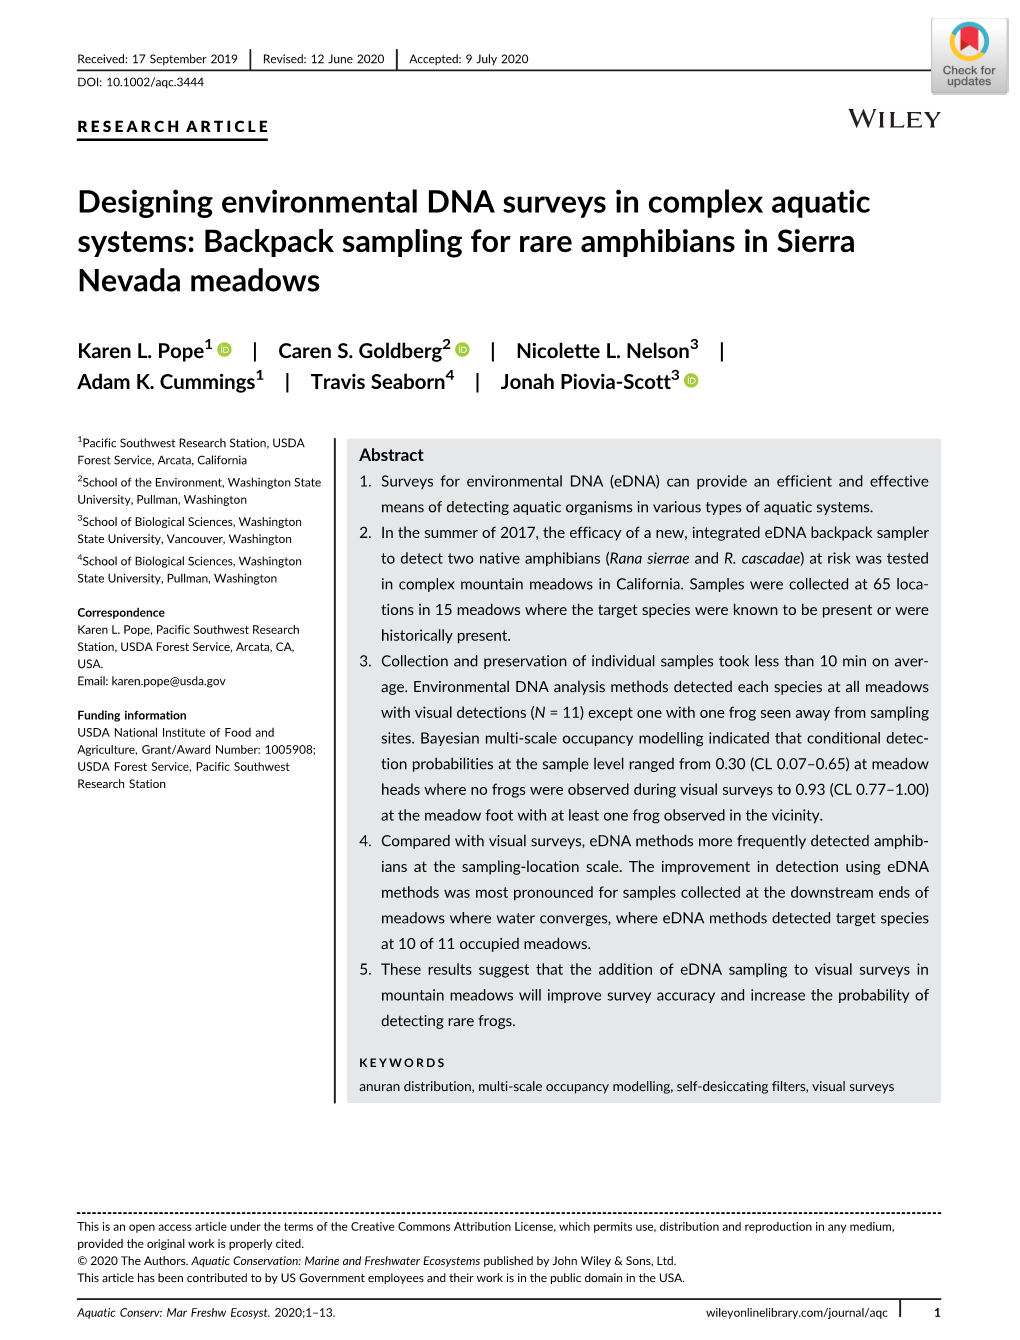 Designing Environmental DNA Surveys in Complex Aquatic Systems: Backpack Sampling for Rare Amphibians in Sierra Nevada Meadows